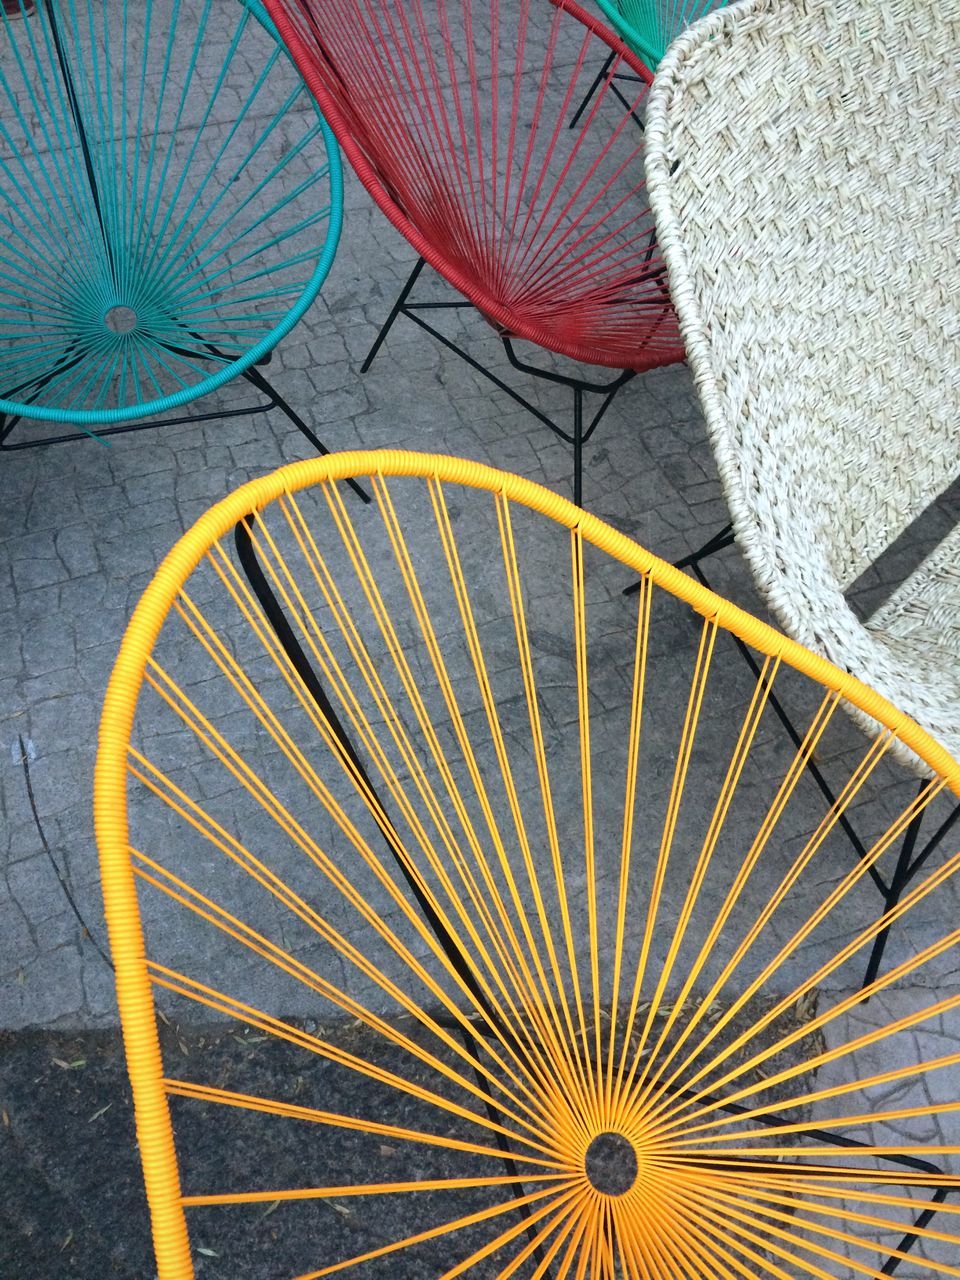 no people, day, high angle view, pattern, protection, multi colored, security, outdoors, still life, close-up, art and craft, parasol, design, yellow, absence, chair, wheel, spoke, choice, foldable